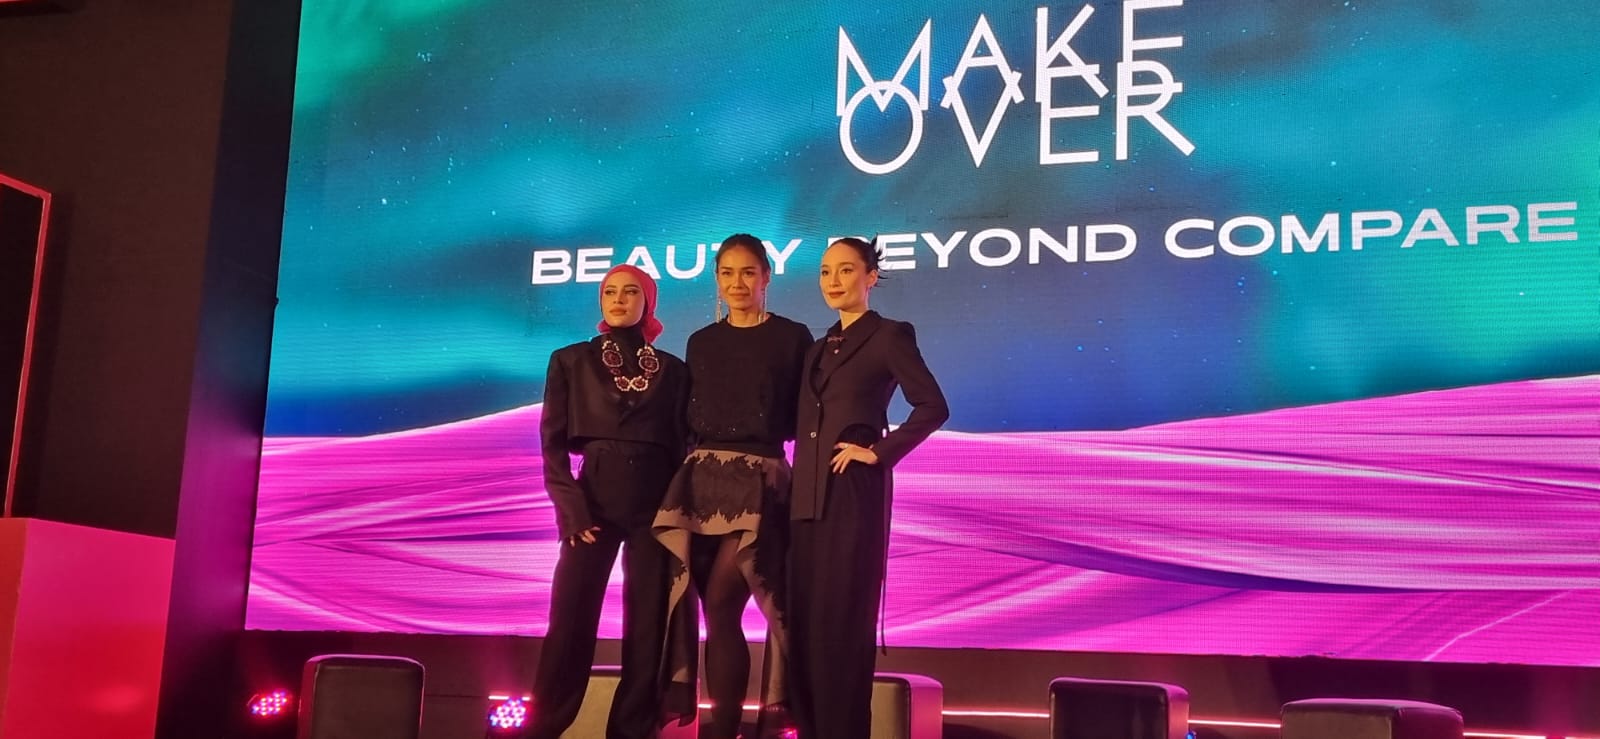 Make Over 'Beauty Beyond Compare' Launch